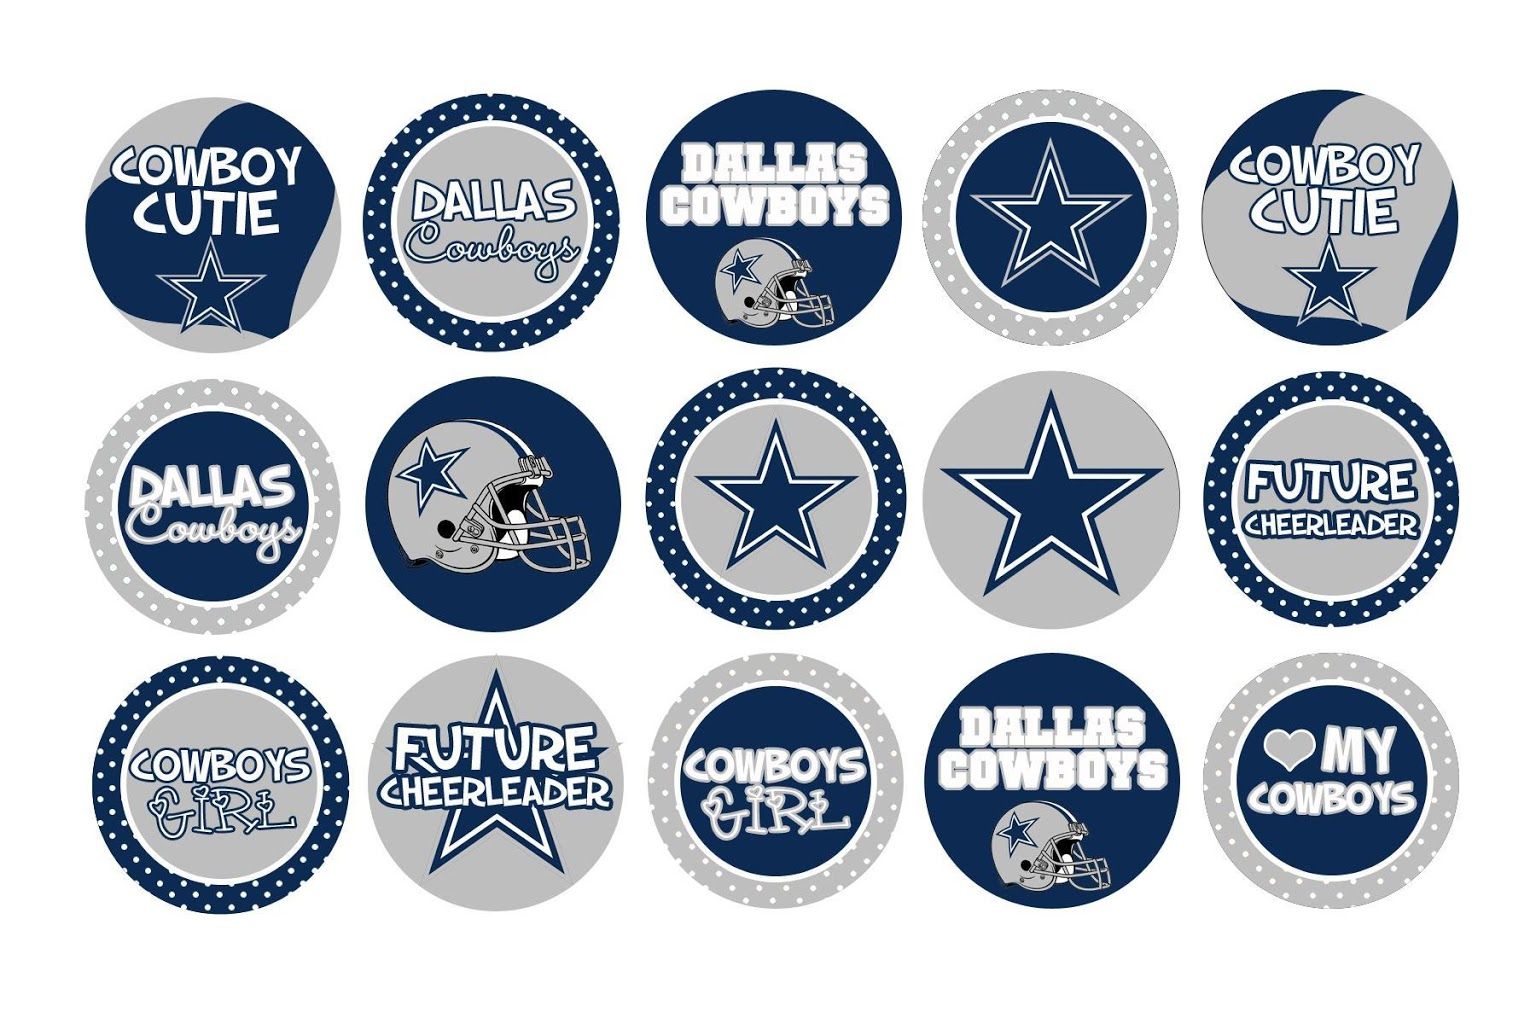 40+ Dallas Cowboys Wallpaper - Android Apps & Games on Brothersoft.com